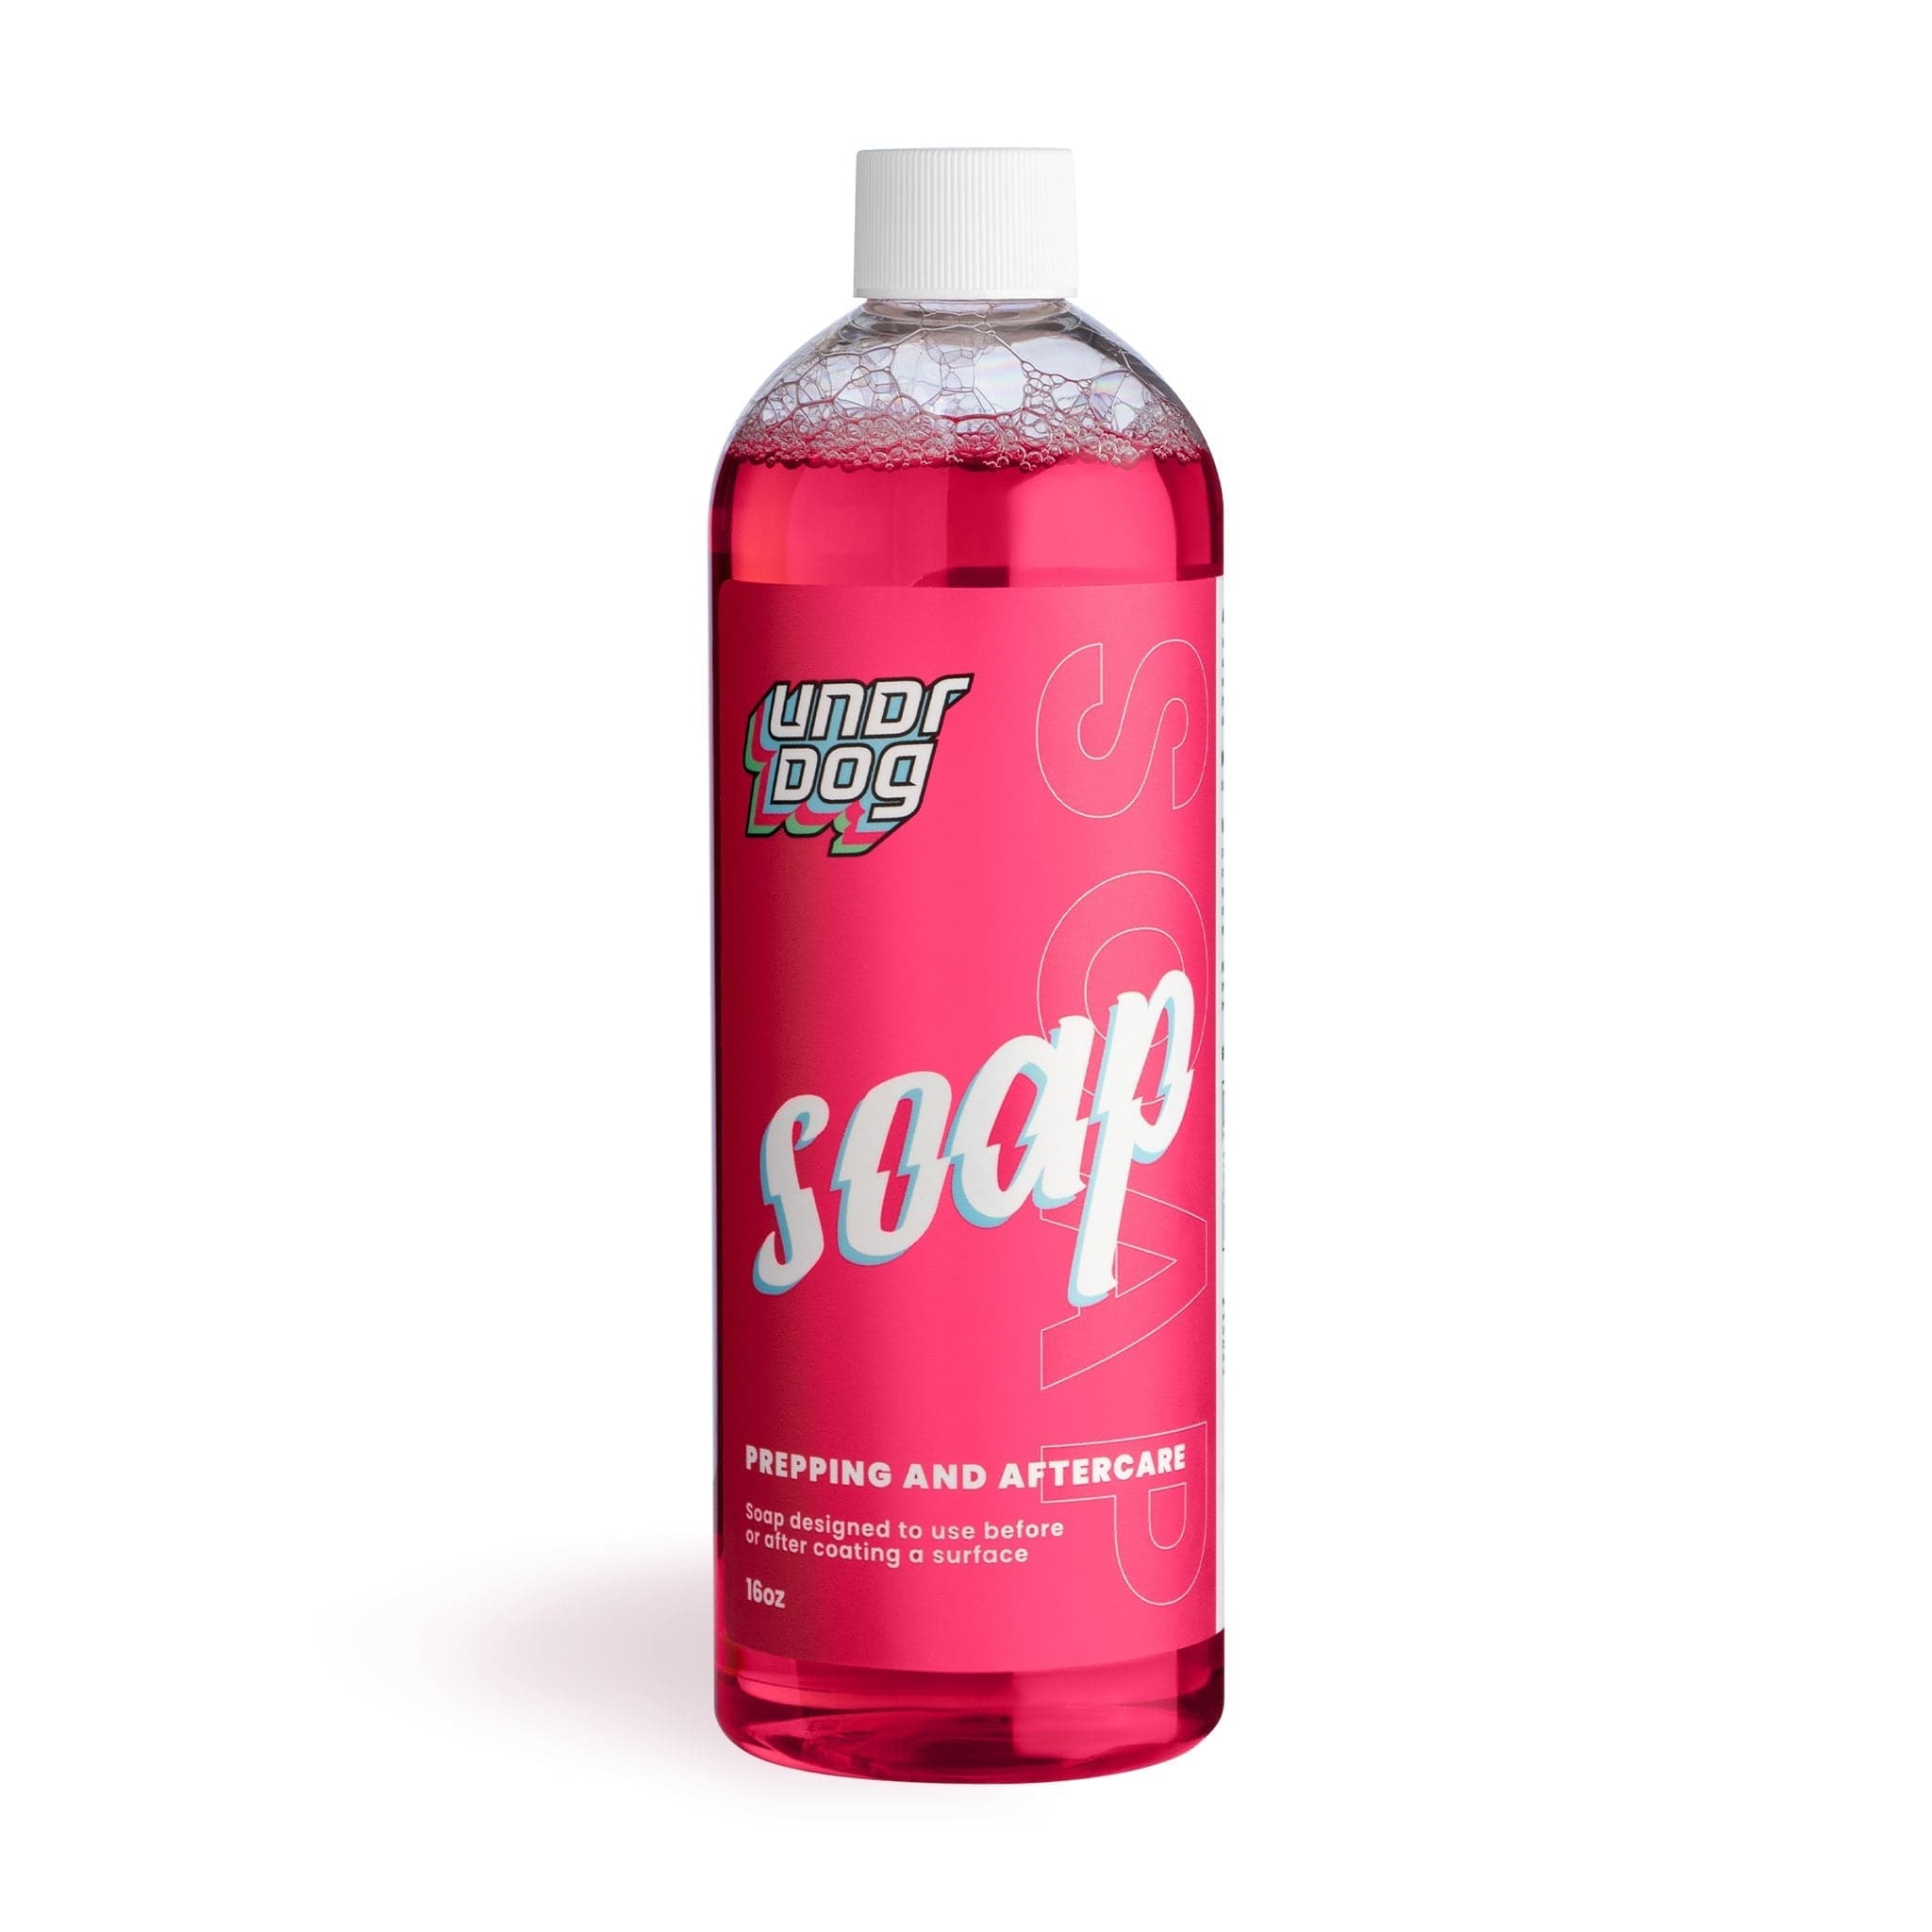 Soap_16oz_37432fdb-080b-45d9-a9be-df1a7fb4fae4.jpg - ColorPop Car Soap: Vibrant Cleaning for Every Hue! - Undrdog Surface Products